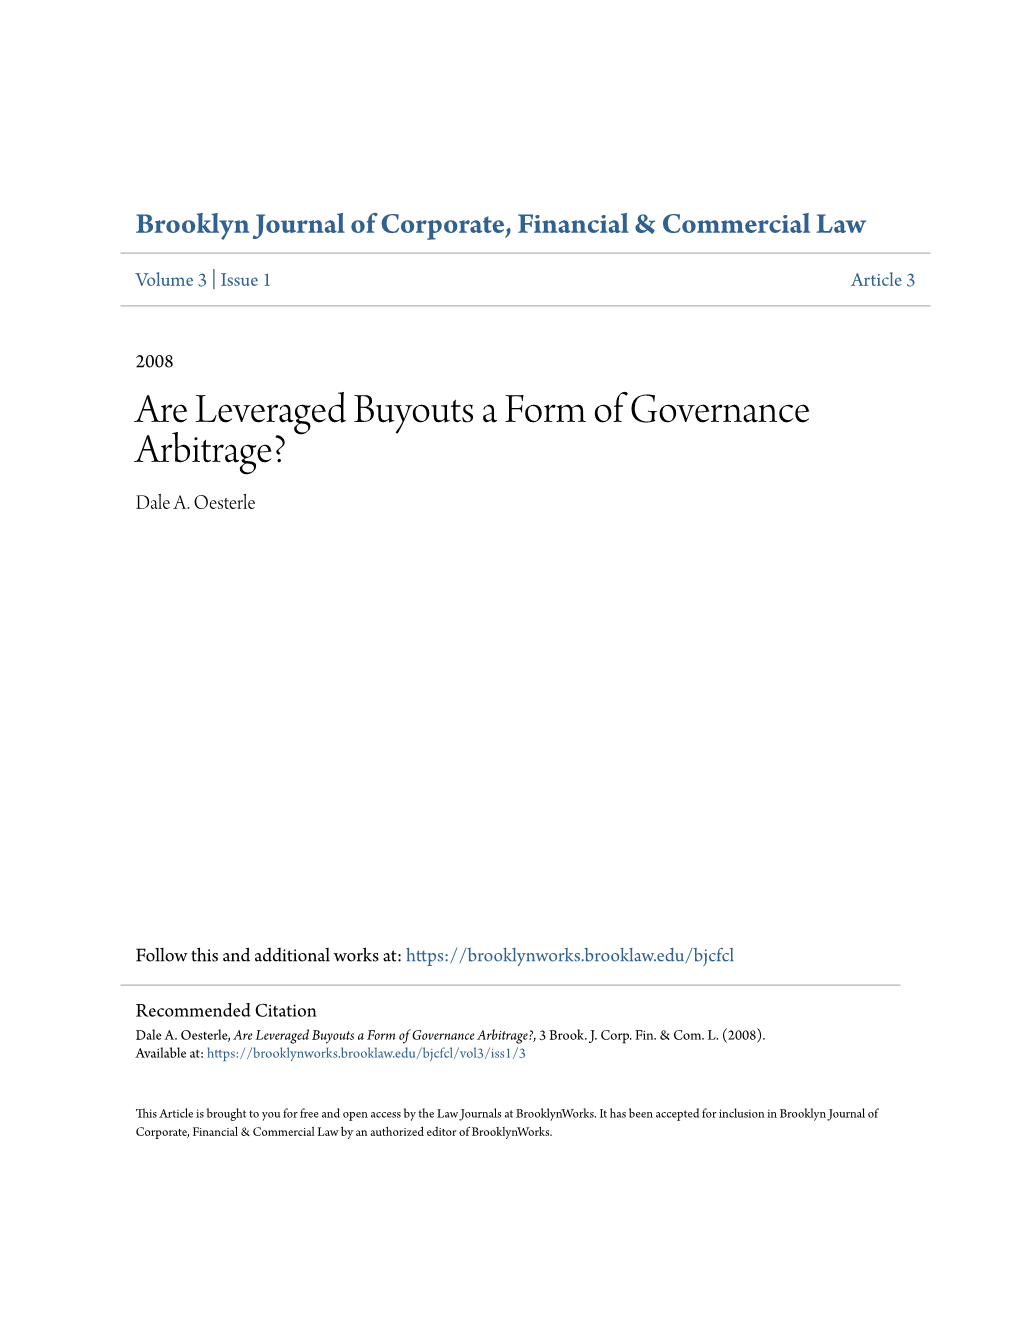 Are Leveraged Buyouts a Form of Governance Arbitrage? Dale A